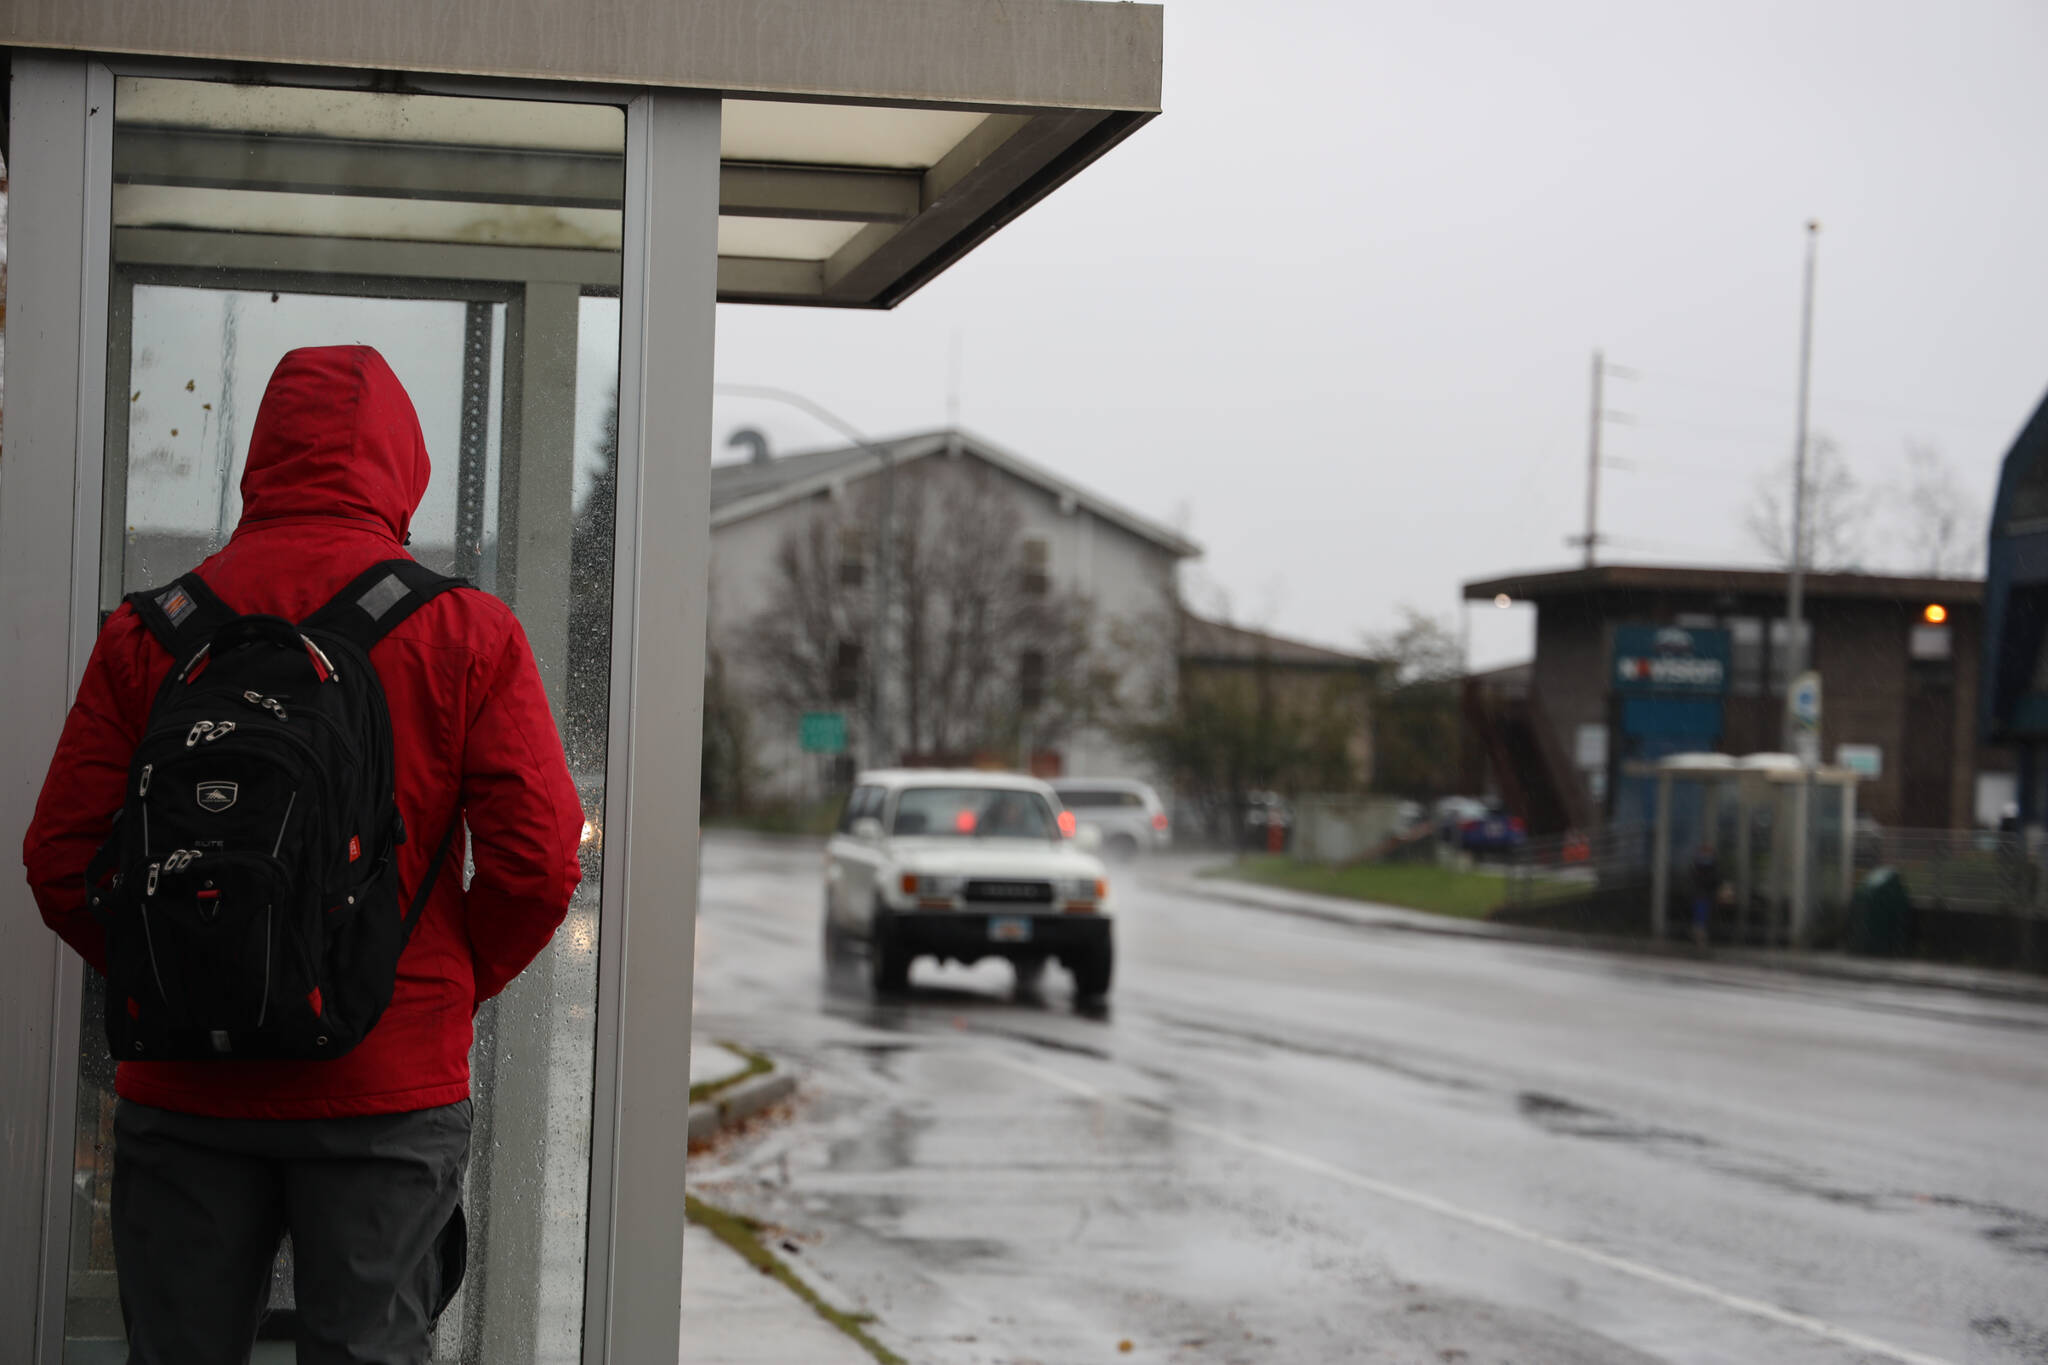 A person waits at a bus station in the Valley area as rain patters around them Thursday afternoon. Weather service expects the rain to end in the Juneau area overnight Thursday and another front to arrive again Friday night. (Clarise Larson / Juneau Empire)